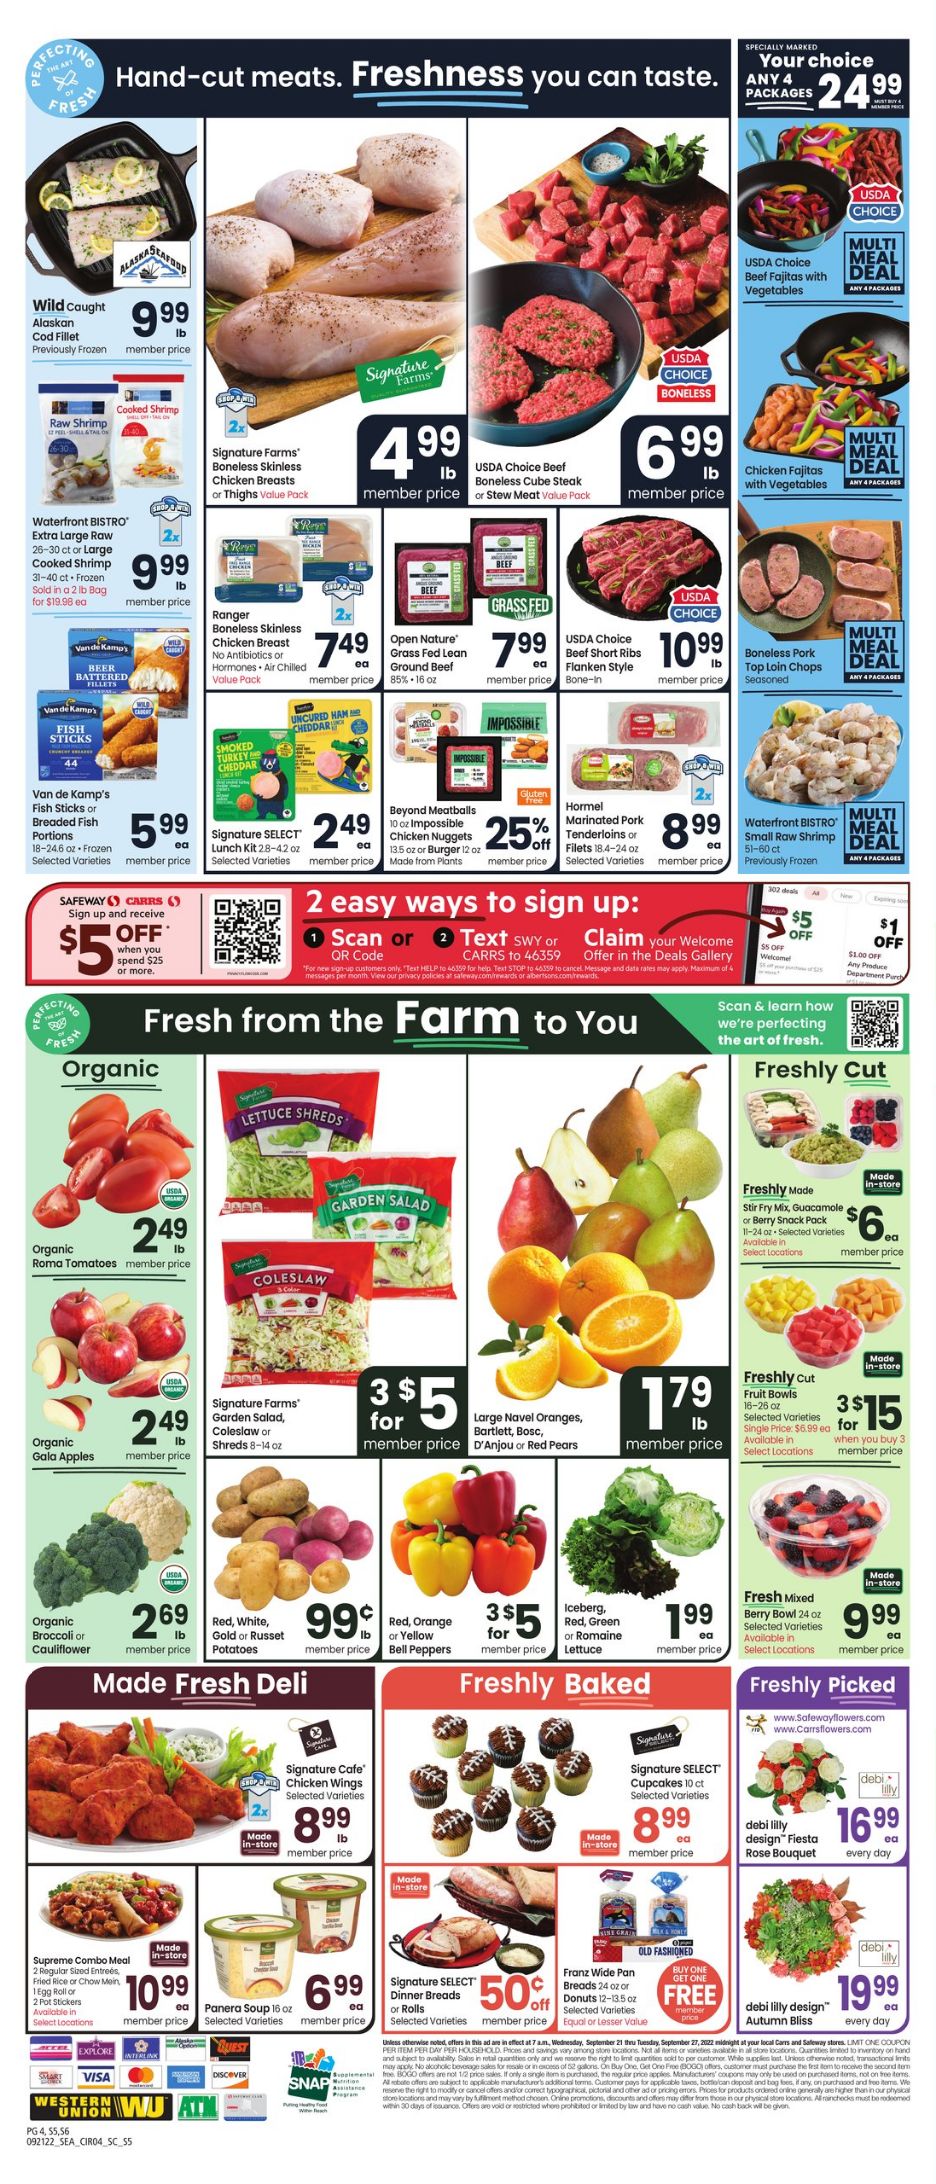 Weekly ad Carrs 09/21/2022 - 09/27/2022